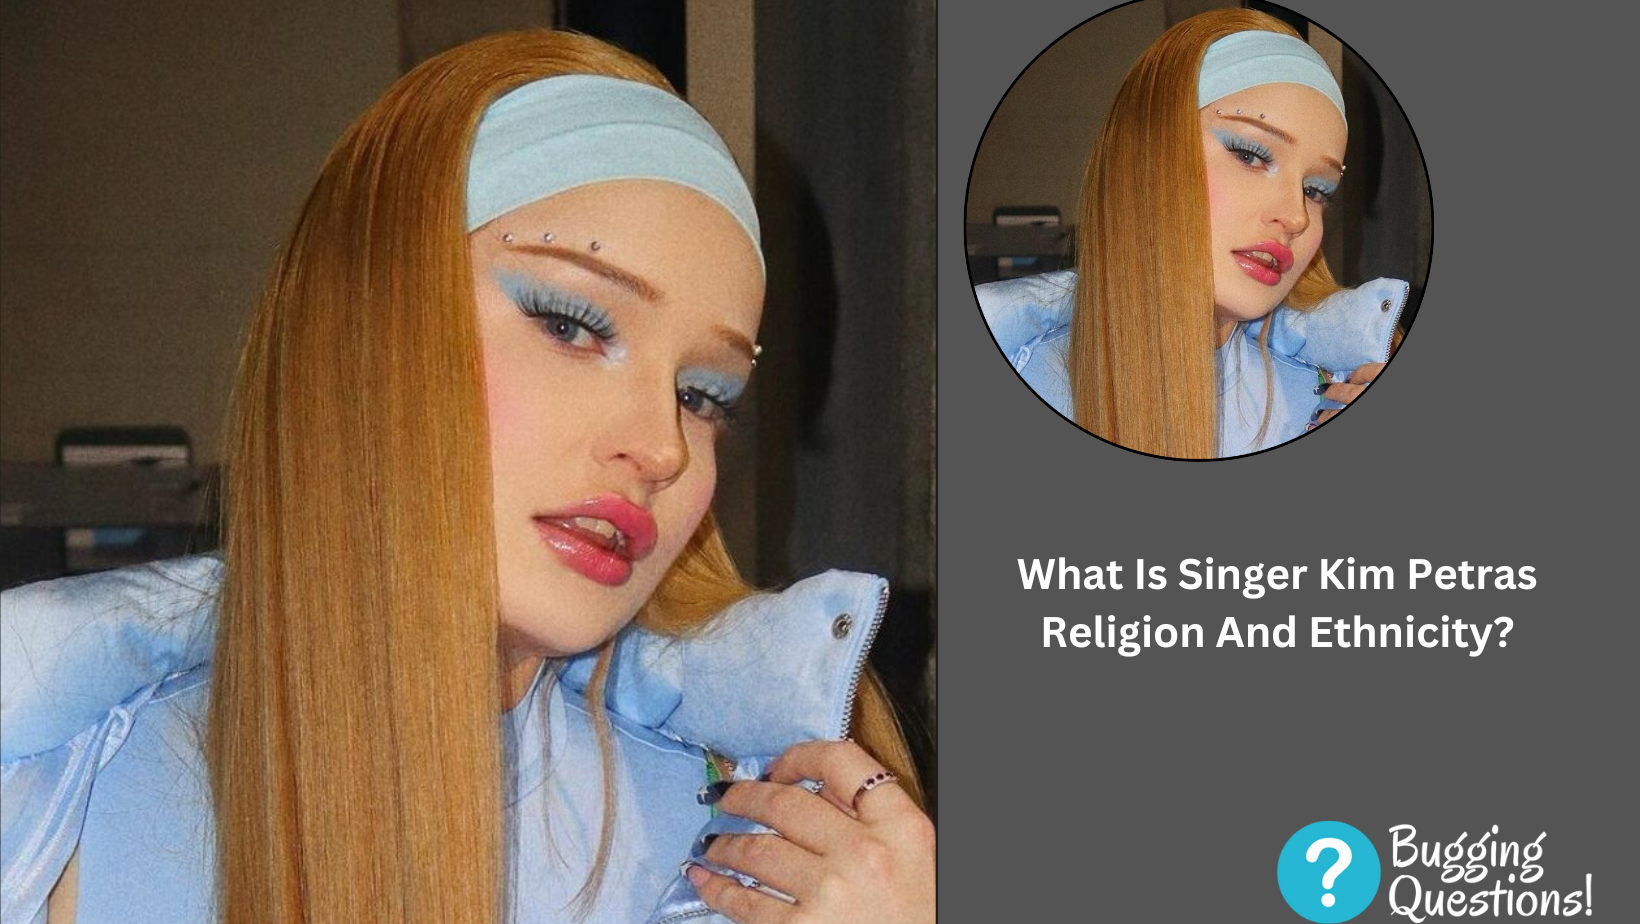 What Is Singer Kim Petras Religion And Ethnicity?